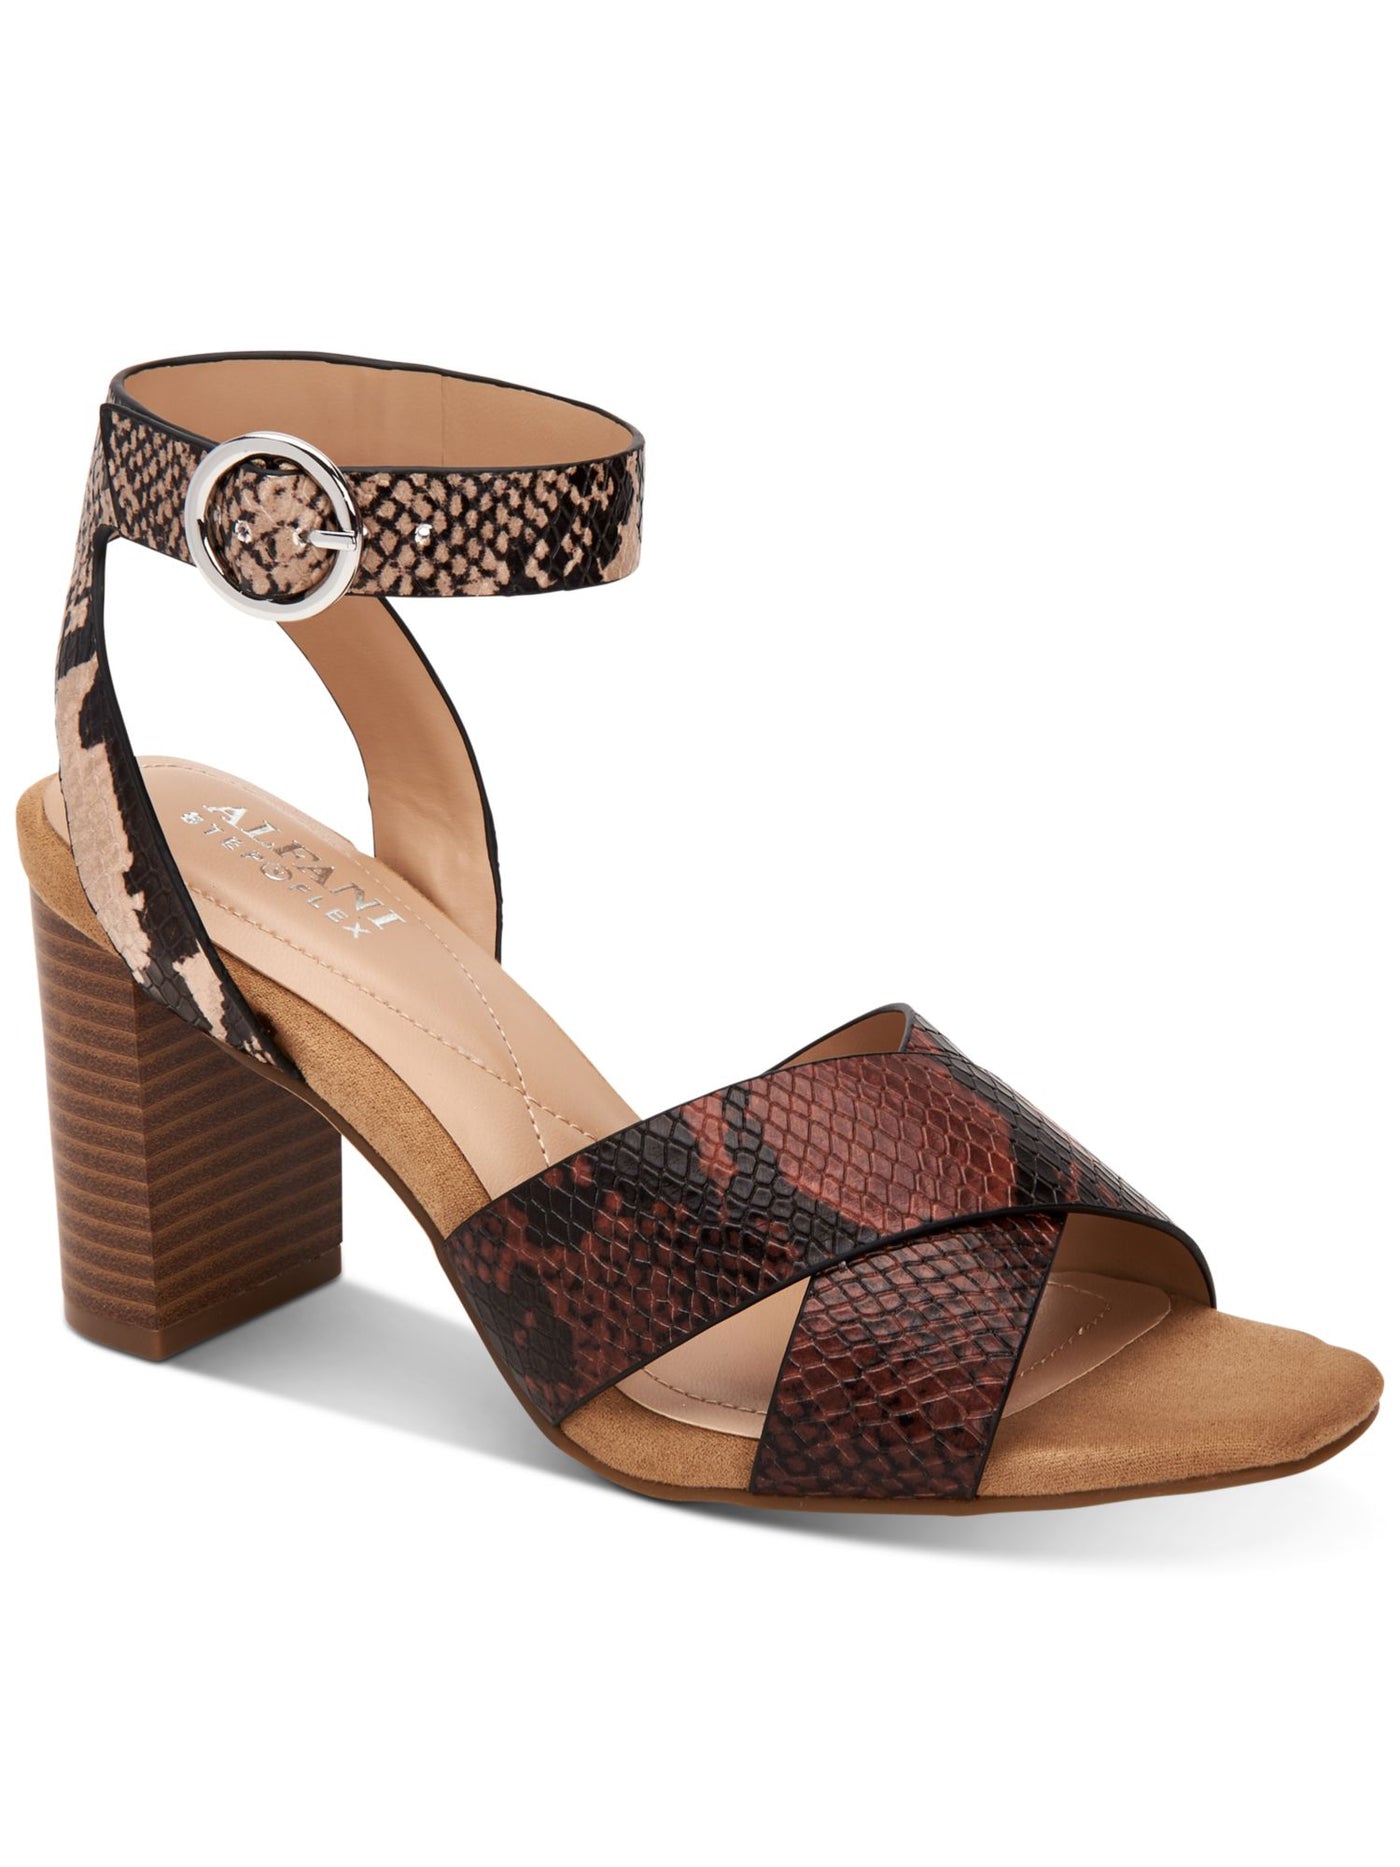 ALFANI Womens Brown Snake Print Crisscross Straps Cushioned Ankle Strap Irinna Square Toe Block Heel Buckle Sandals Shoes 5.5 M